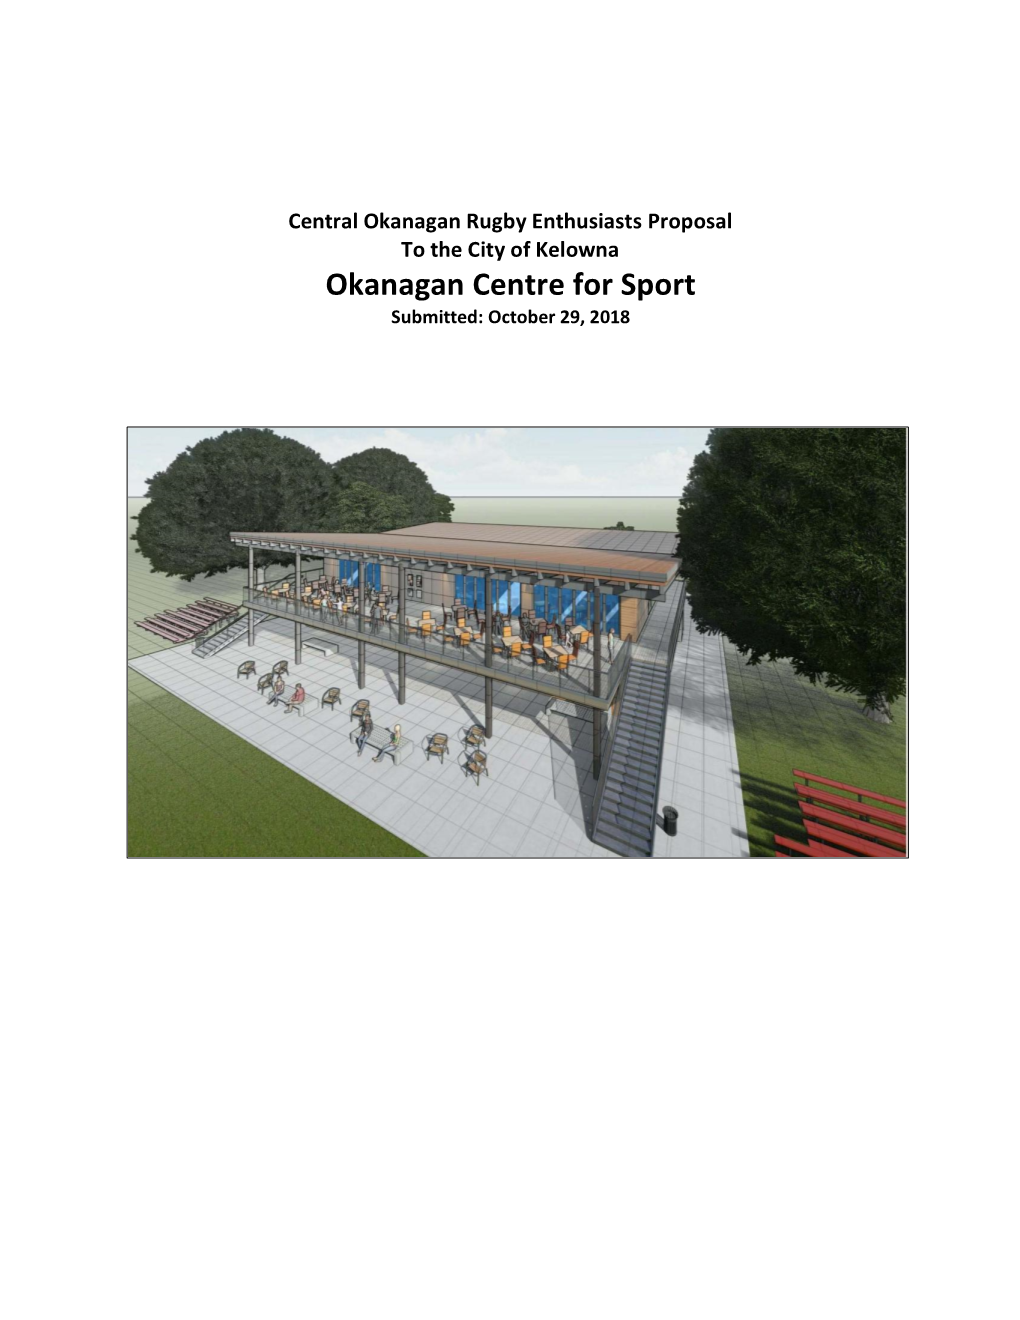 Okanagan Centre for Sport Submitted: October 29, 2018